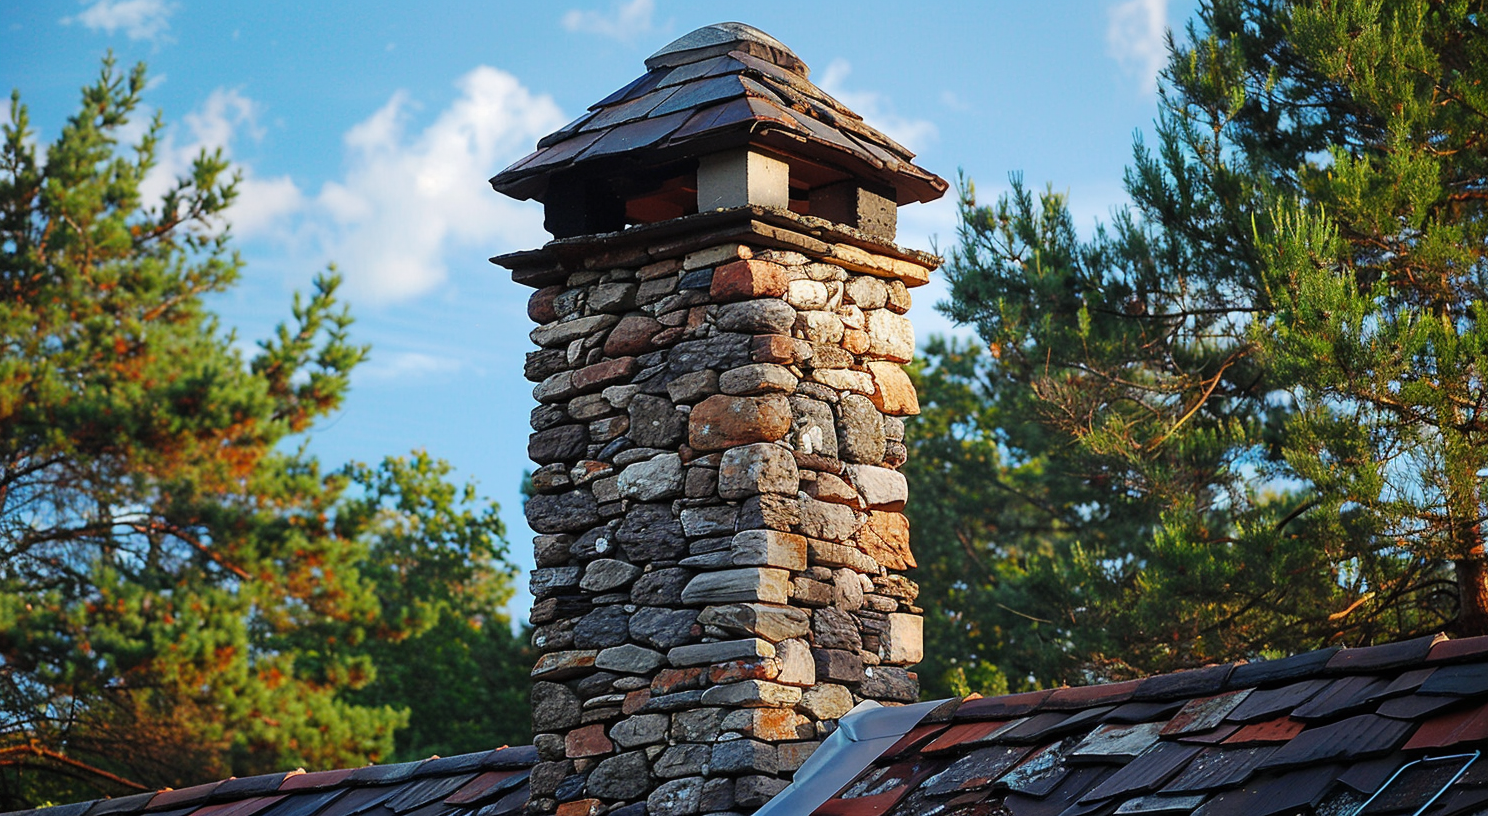 Stone chimney on the roof.